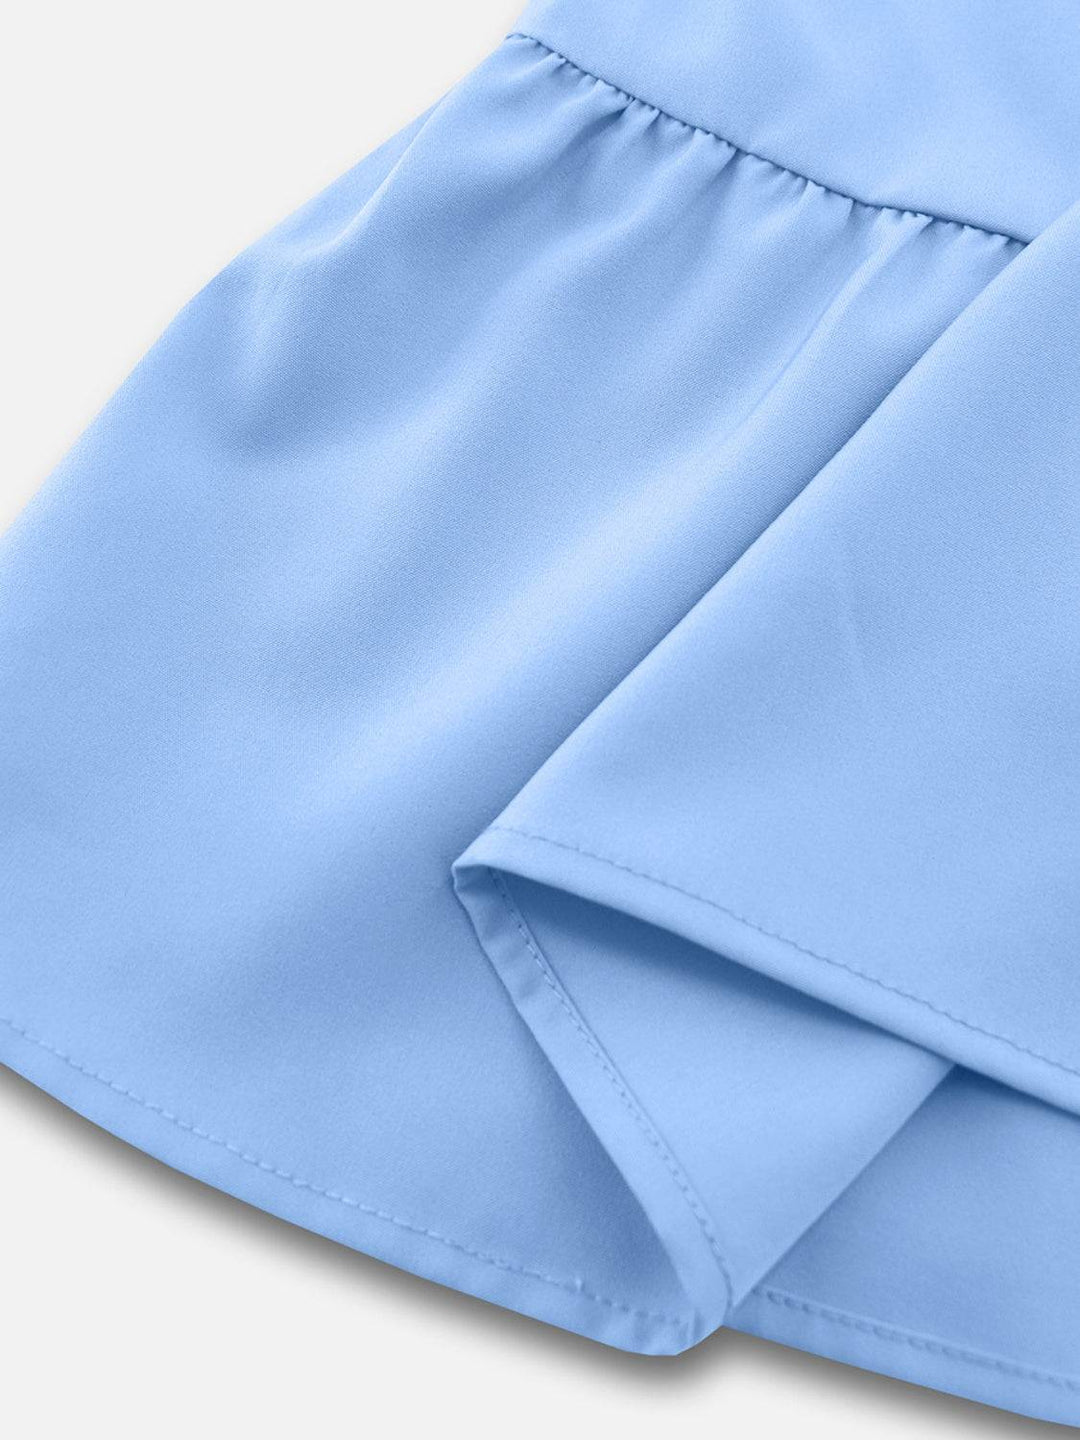 a close up of a blue skirt on a white background